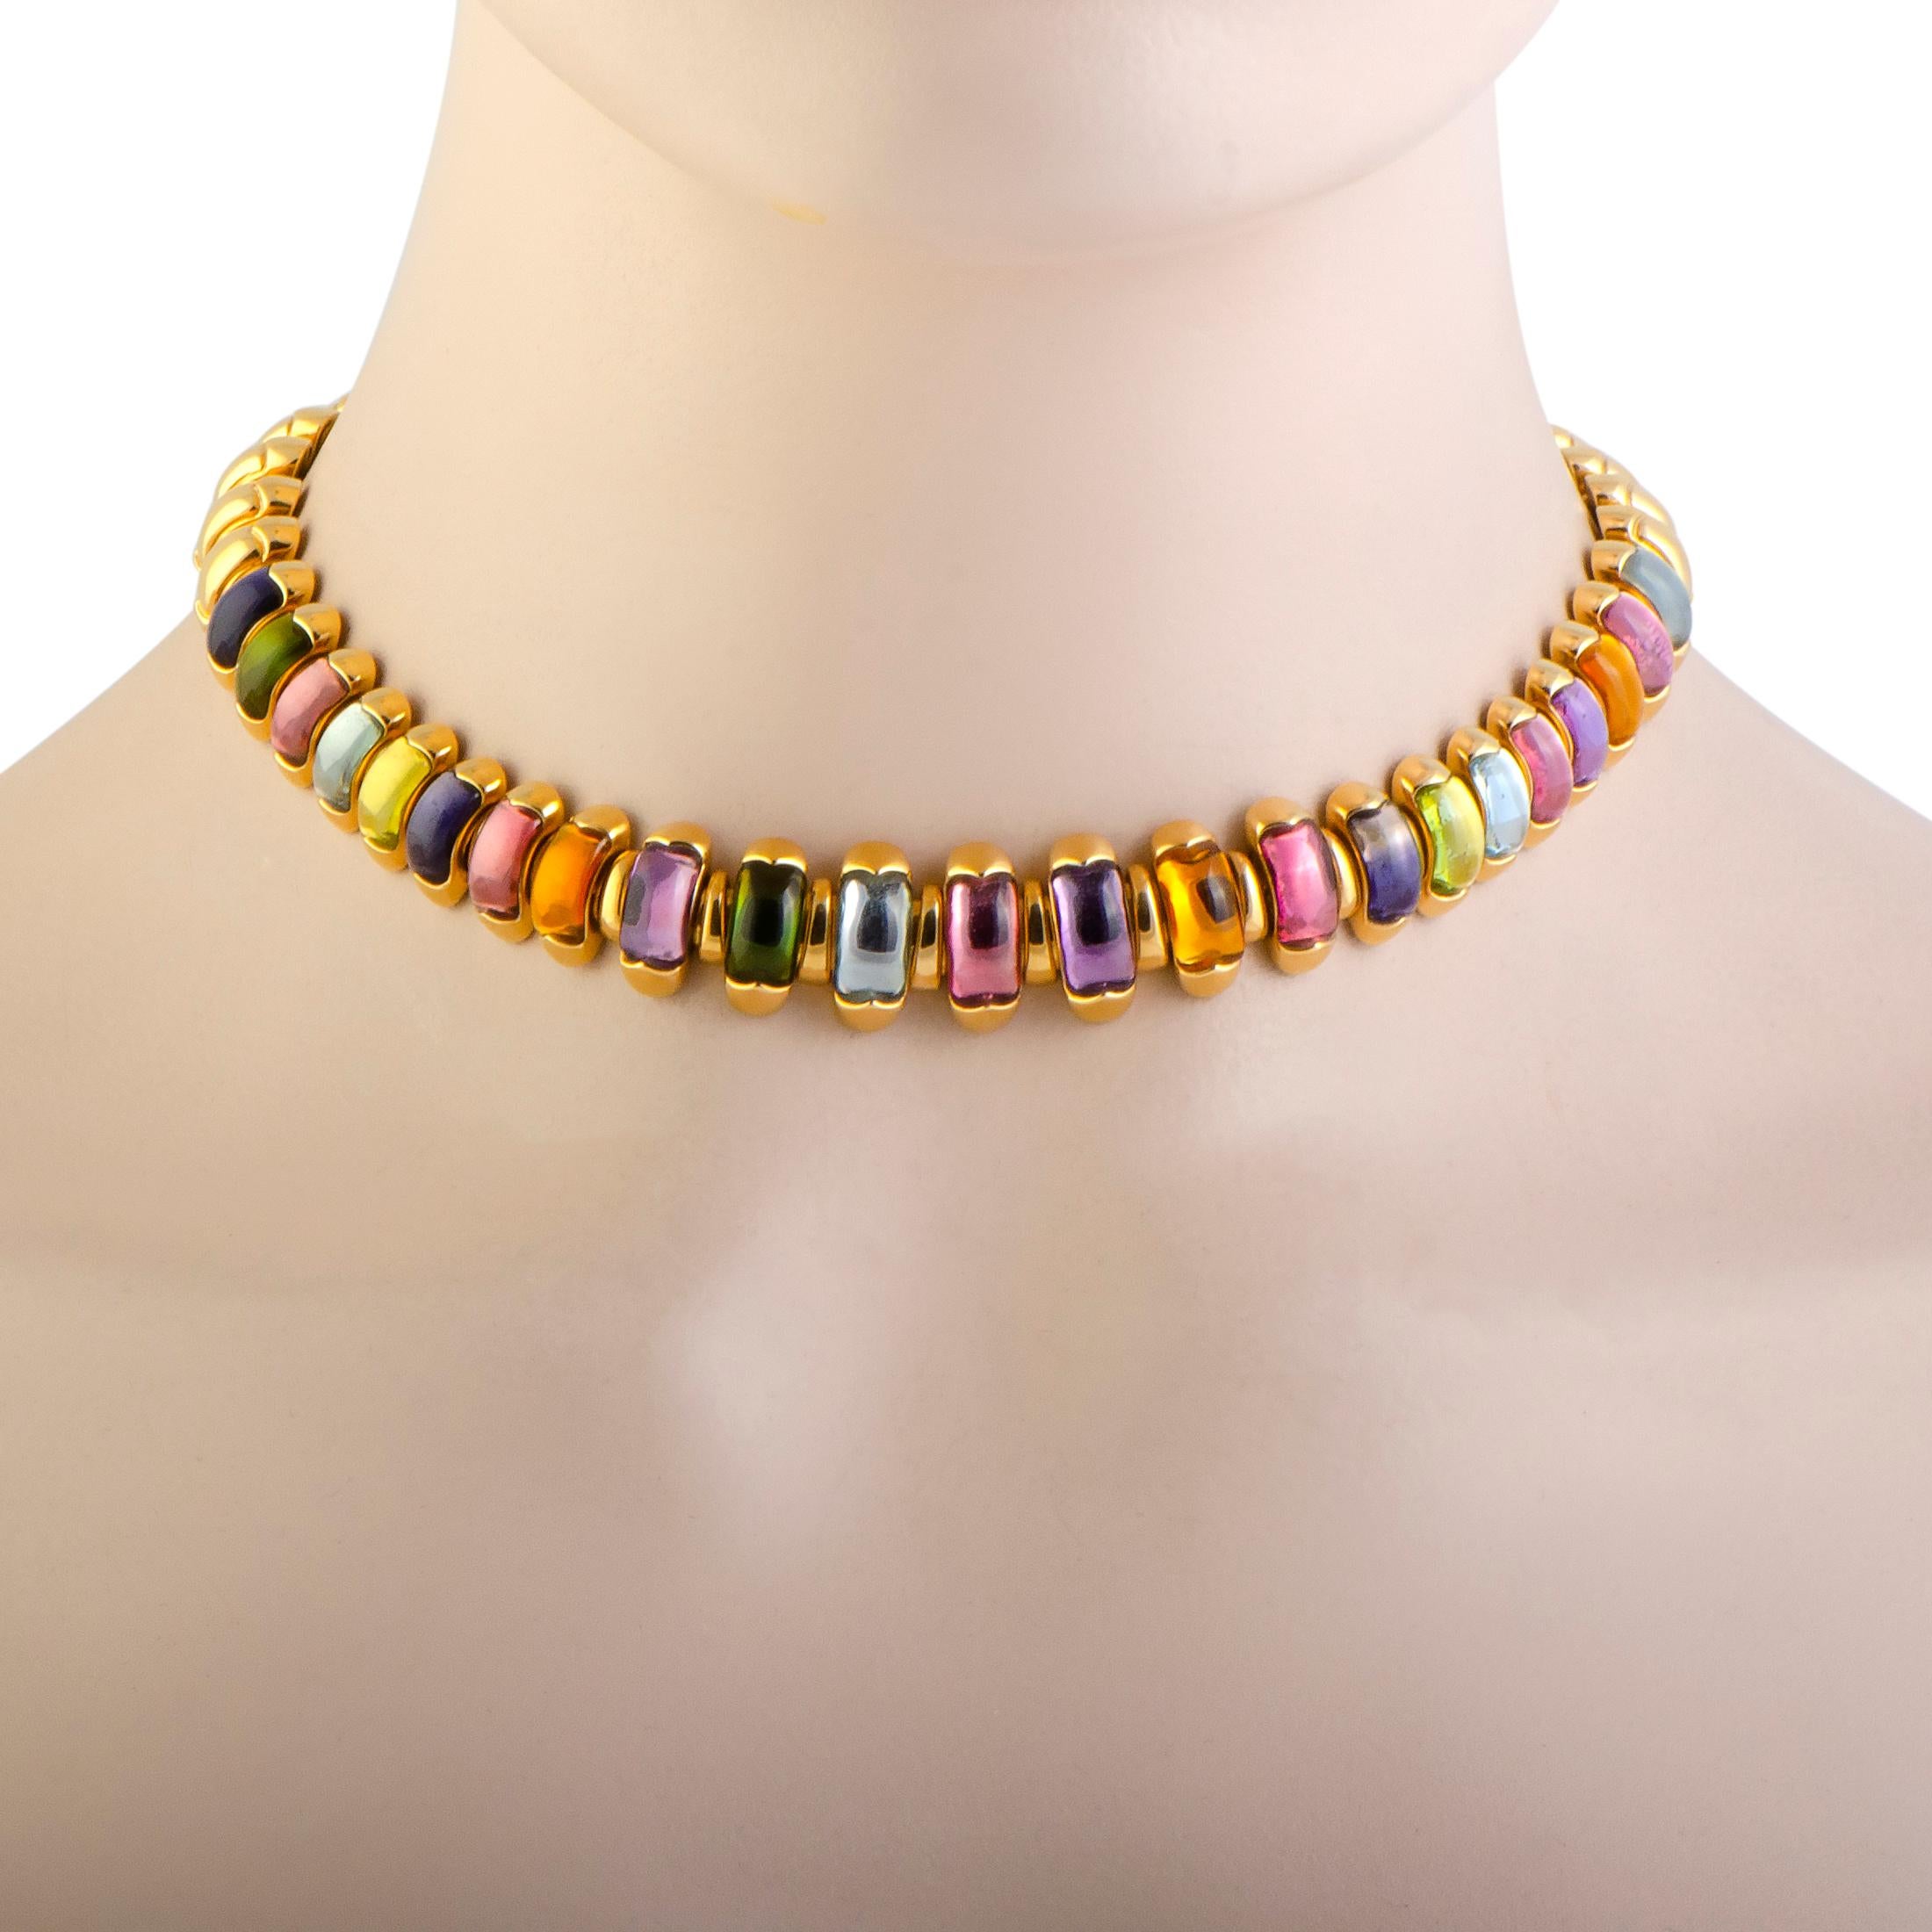 With its exceptional design and attractive gemstone décor, this extraordinary necklace from Bvlgari will accentuate your ensemble in an incredibly eye-catching manner. The necklace is expertly crafted from luxurious 18K yellow gold and set with a